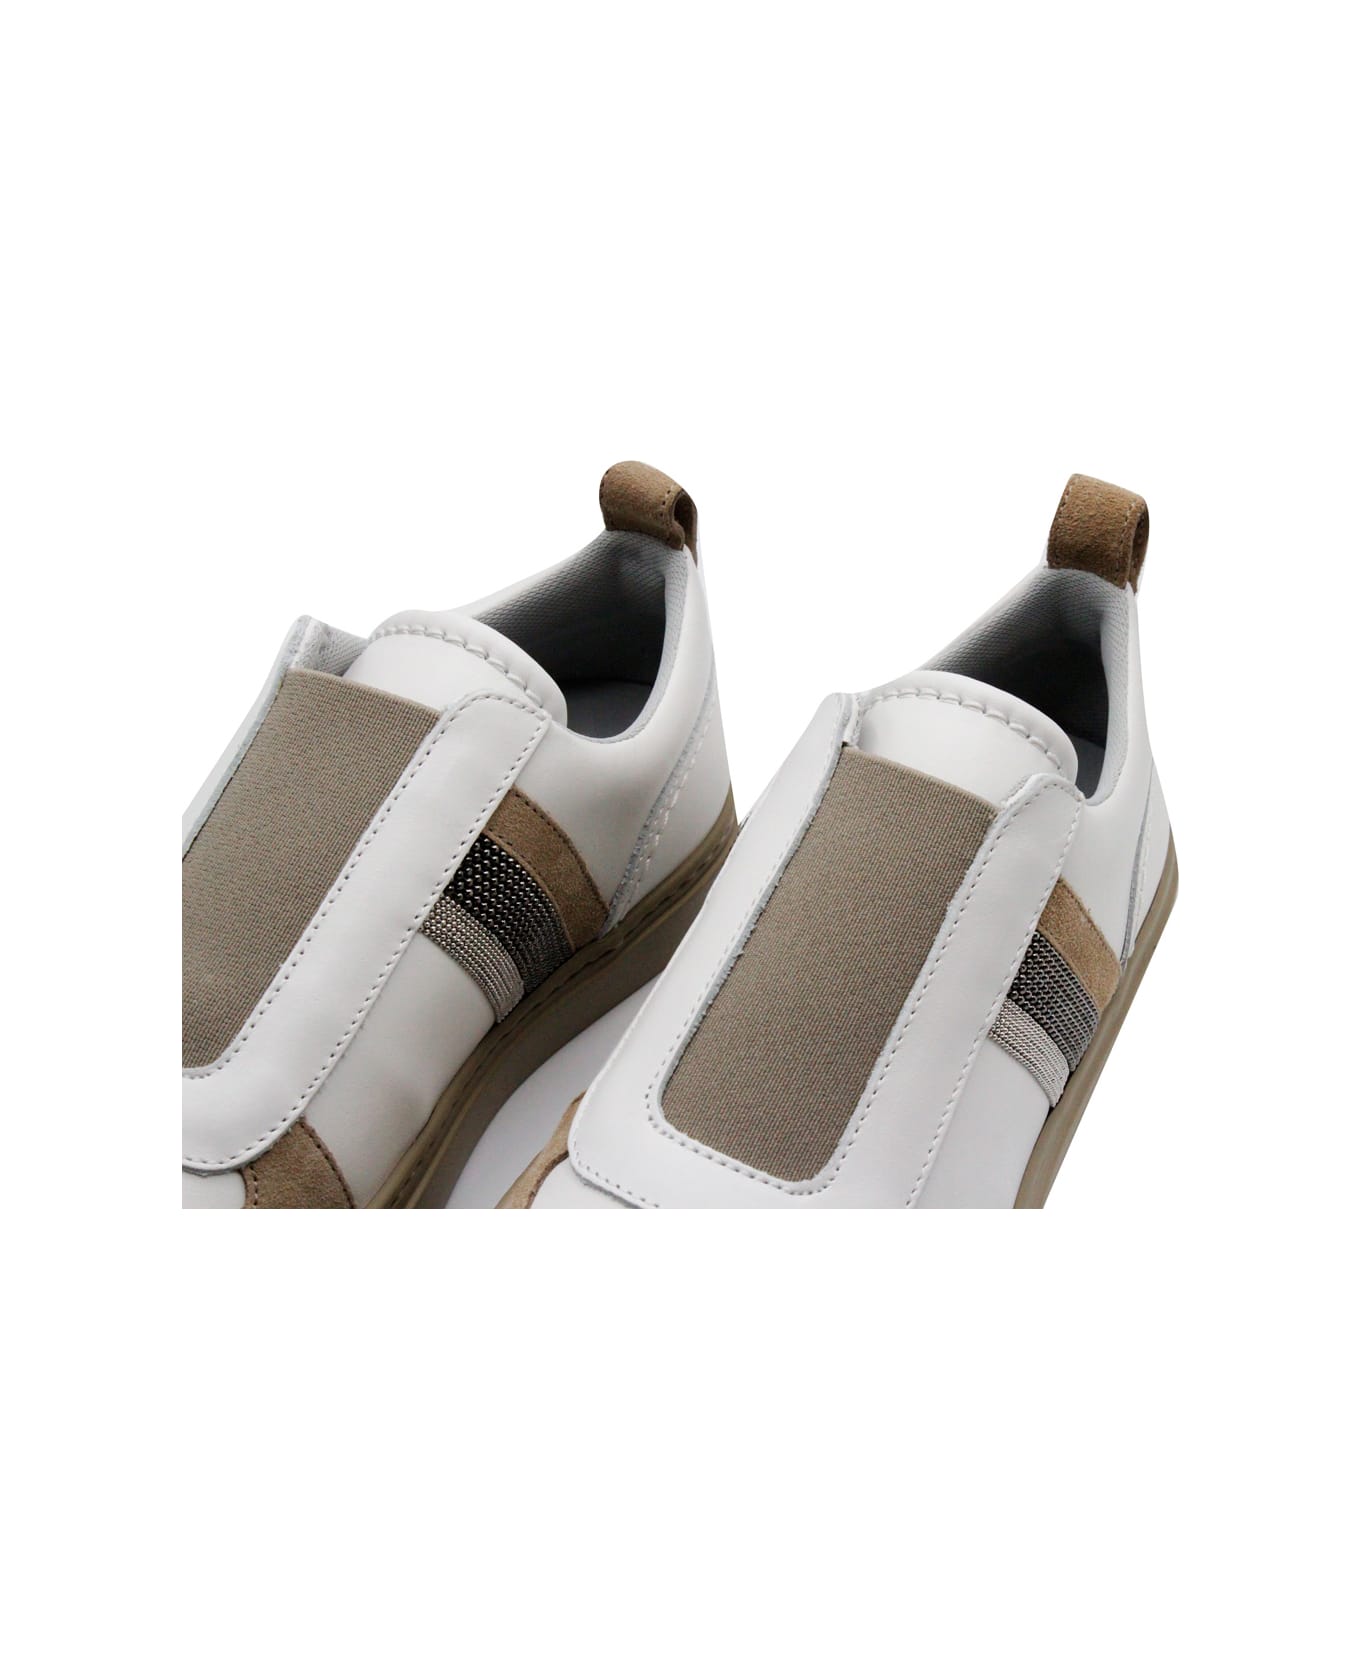 Fabiana Filippi Slip-on Sneaker In Leather With Suede Inserts Embellished With Rows Of Brilliant Jewels On The Sides - White